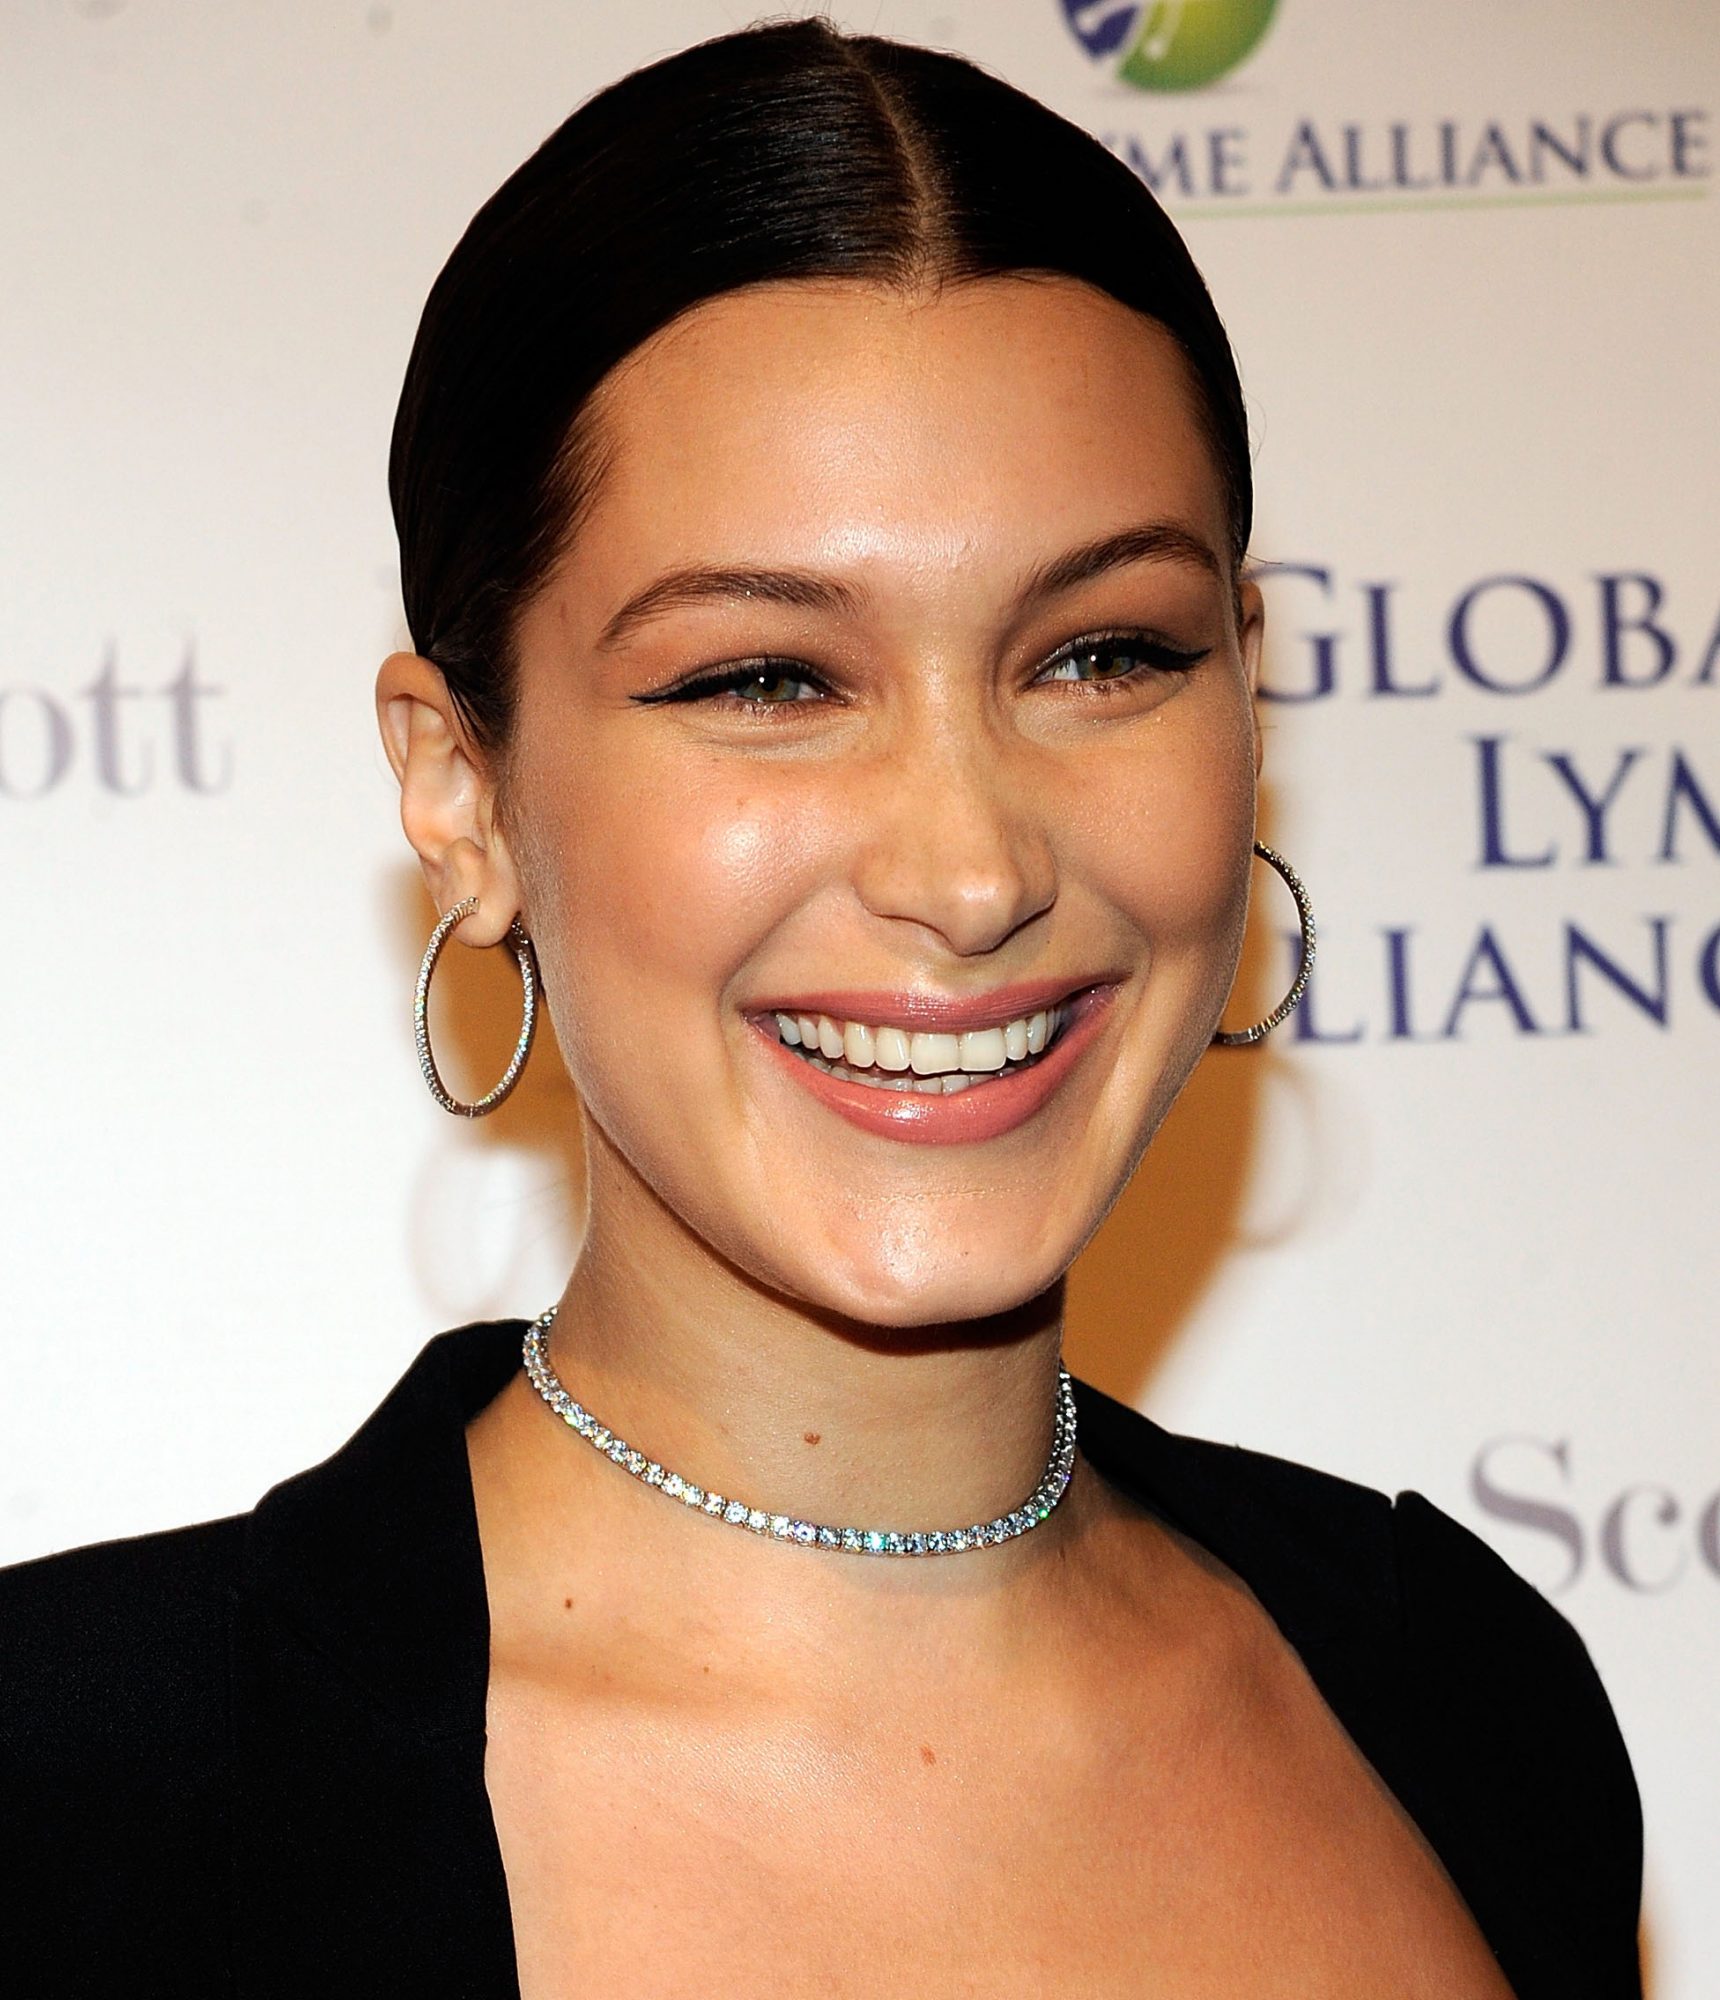 Global Lyme Alliance's 2016 United For A Lyme-Free World Gala - Arrivals